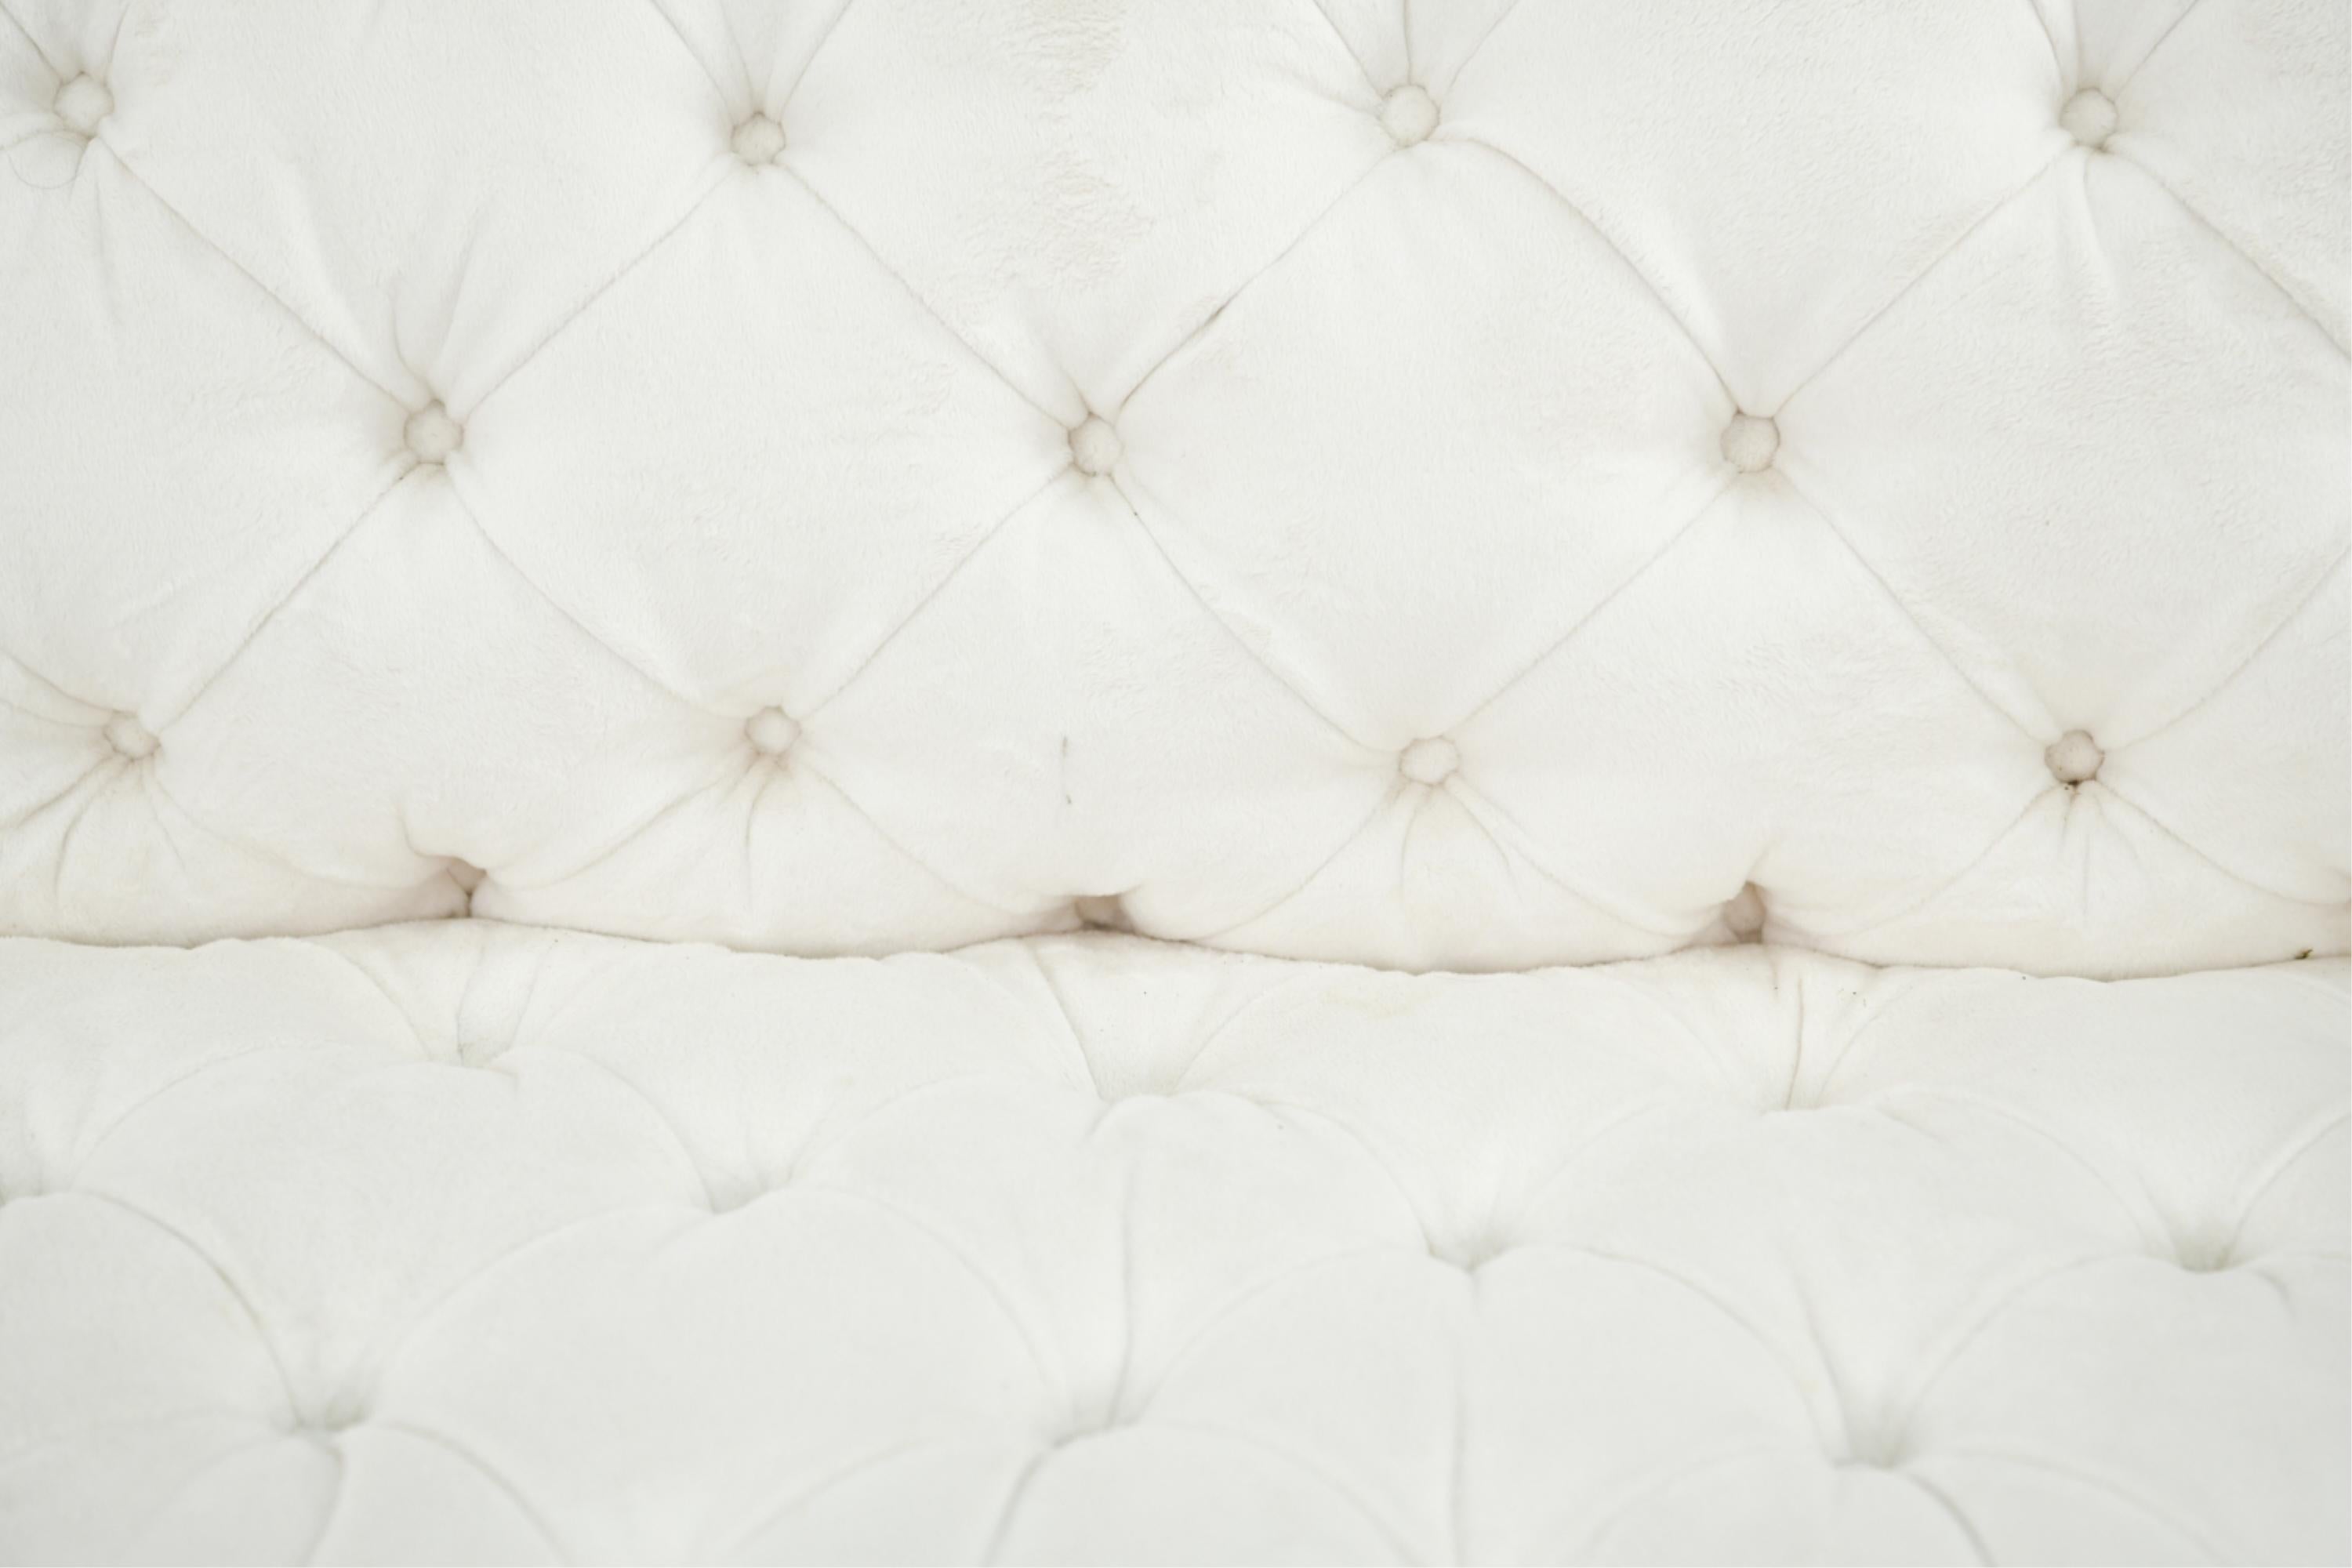 Custom made sofa, upholstered in an off-white faux fur, extra soft and sleek fabric.